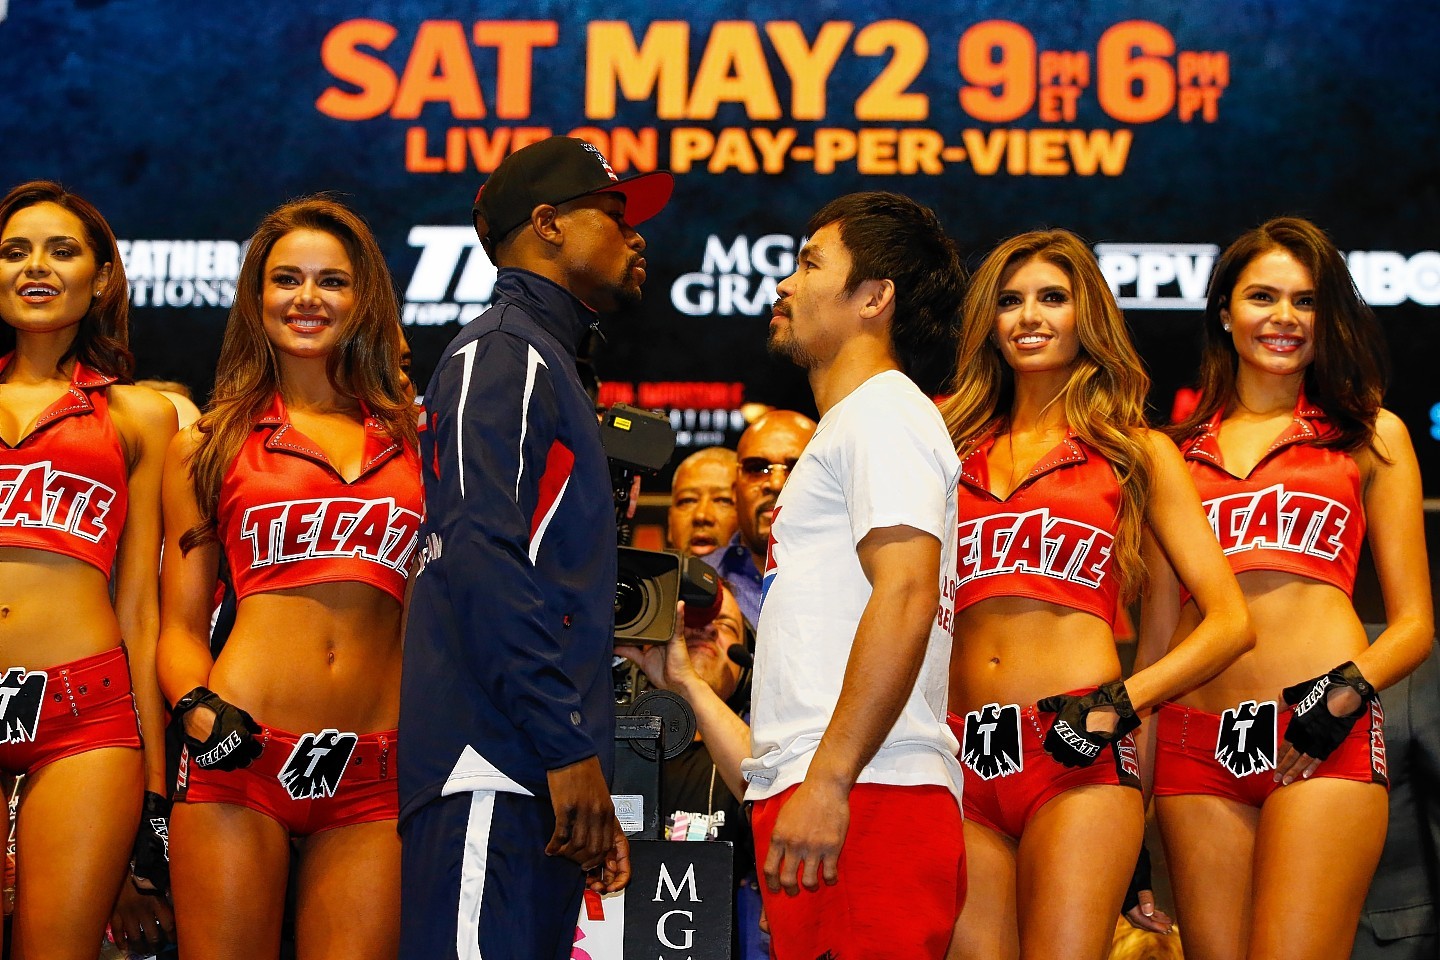 Floyd Mayweather Jr. and Manny Pacquiao face off during the official weigh-in